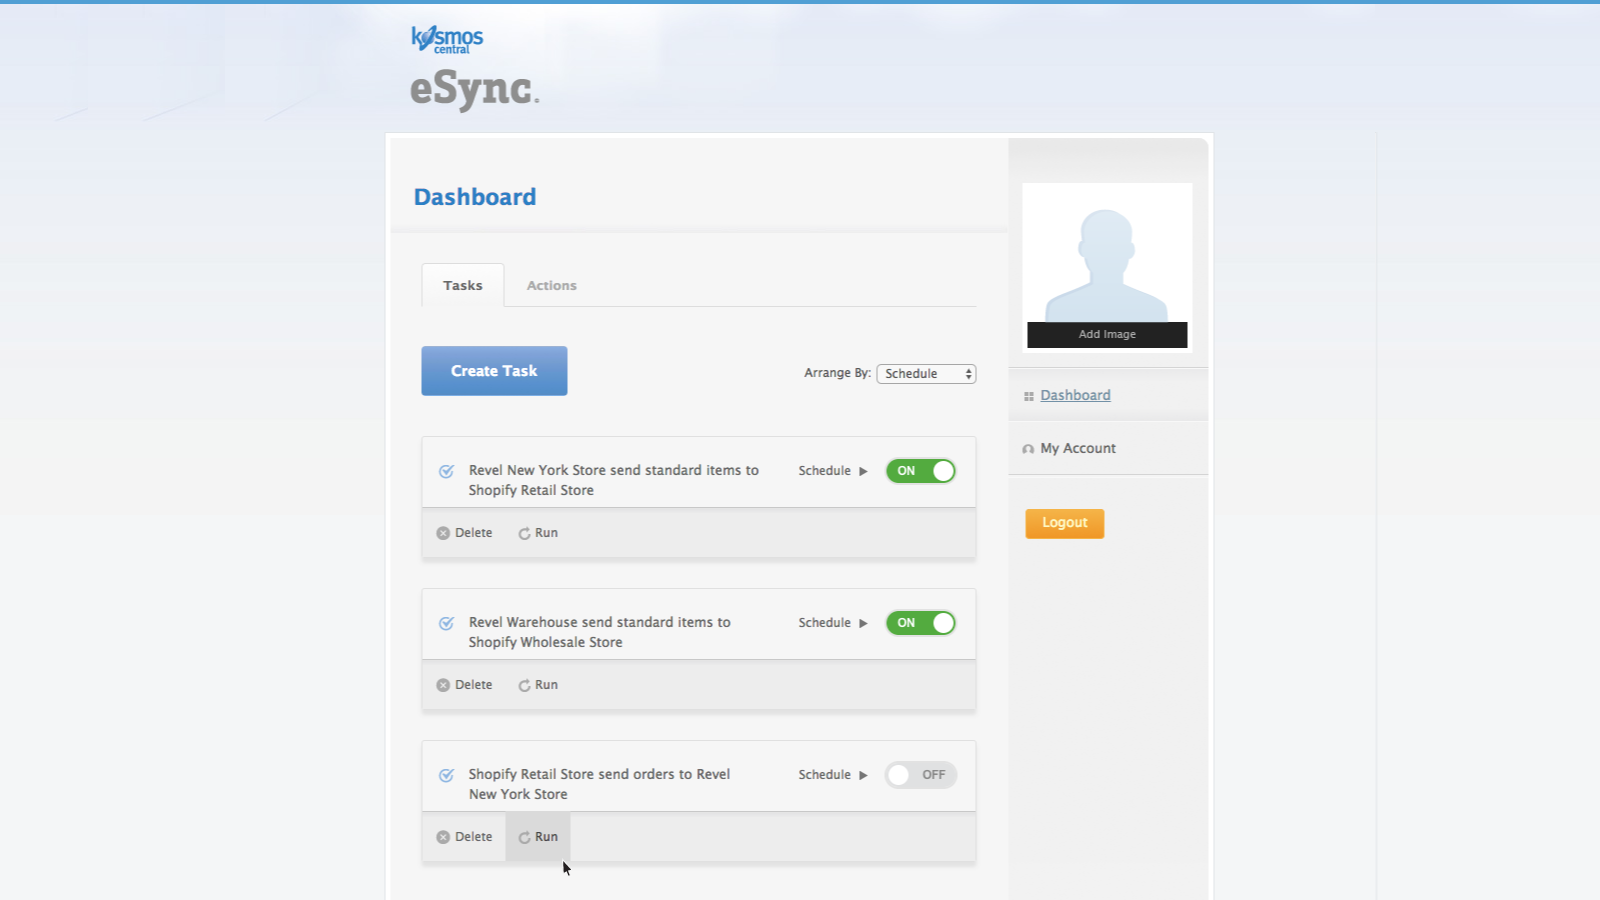 Run Tasks to sync data on demand, or schedule tasks to sync data